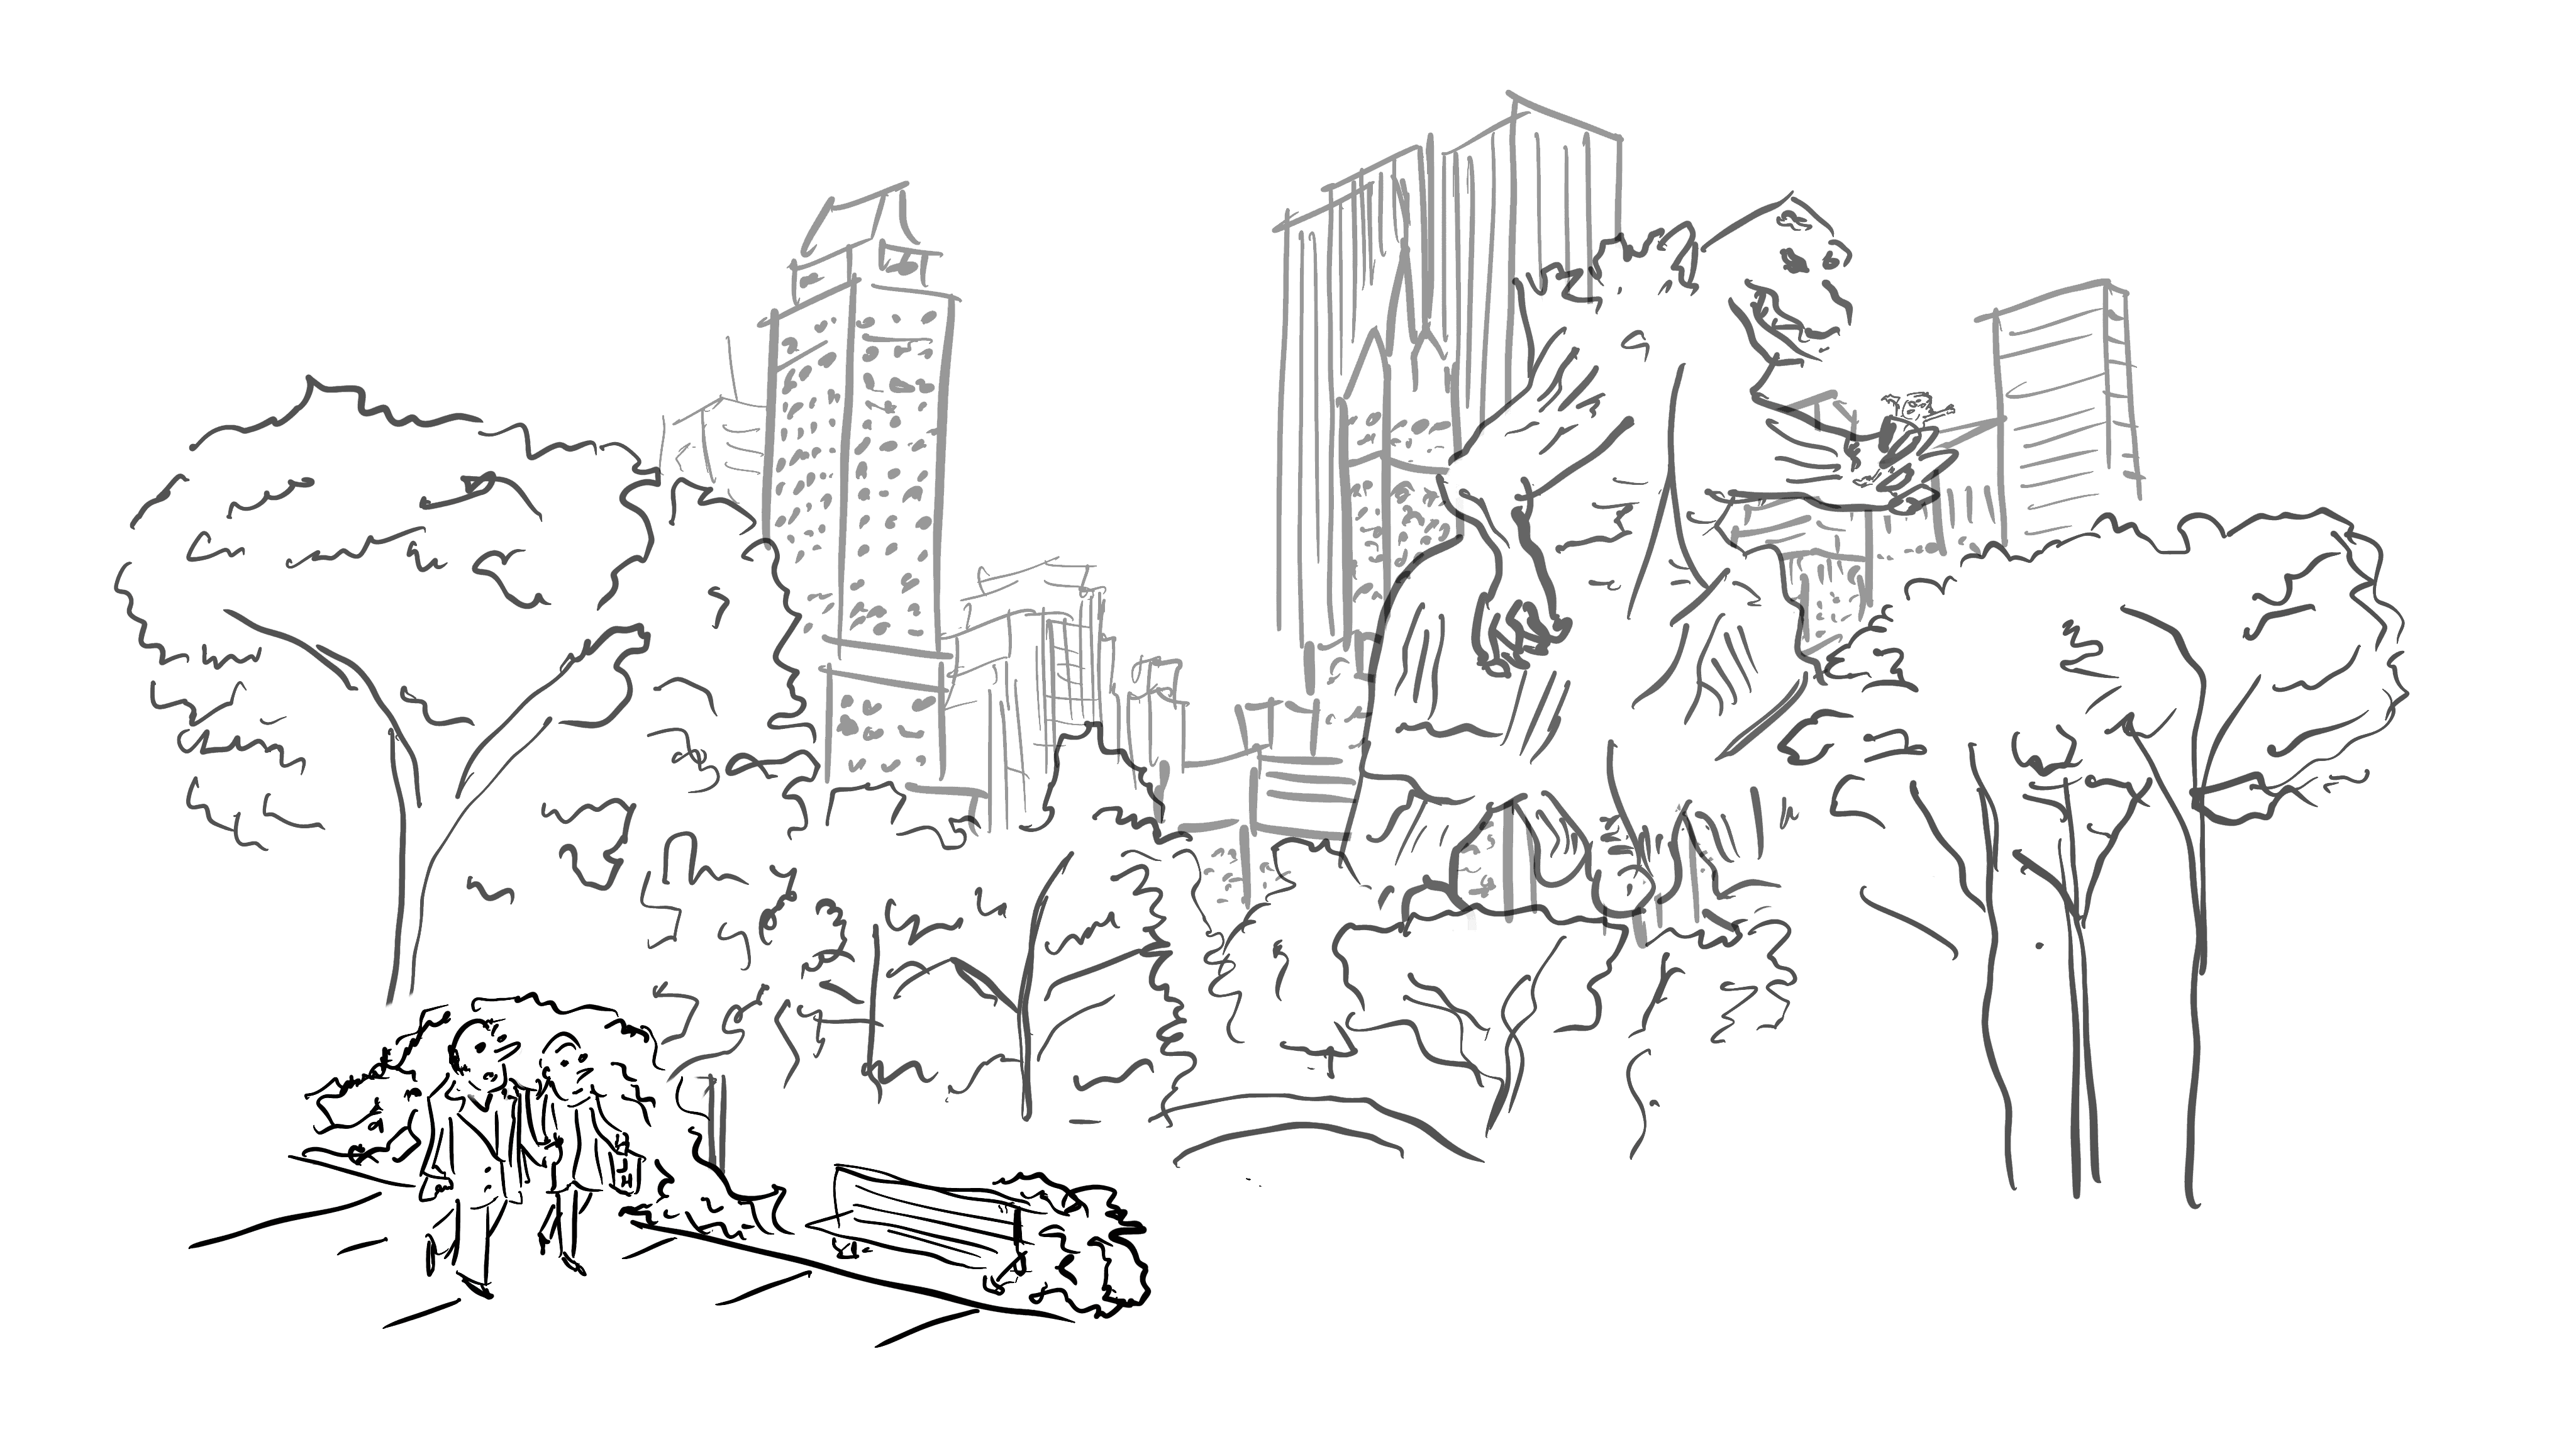 Illustration of a monster on a rampage near Central Park.